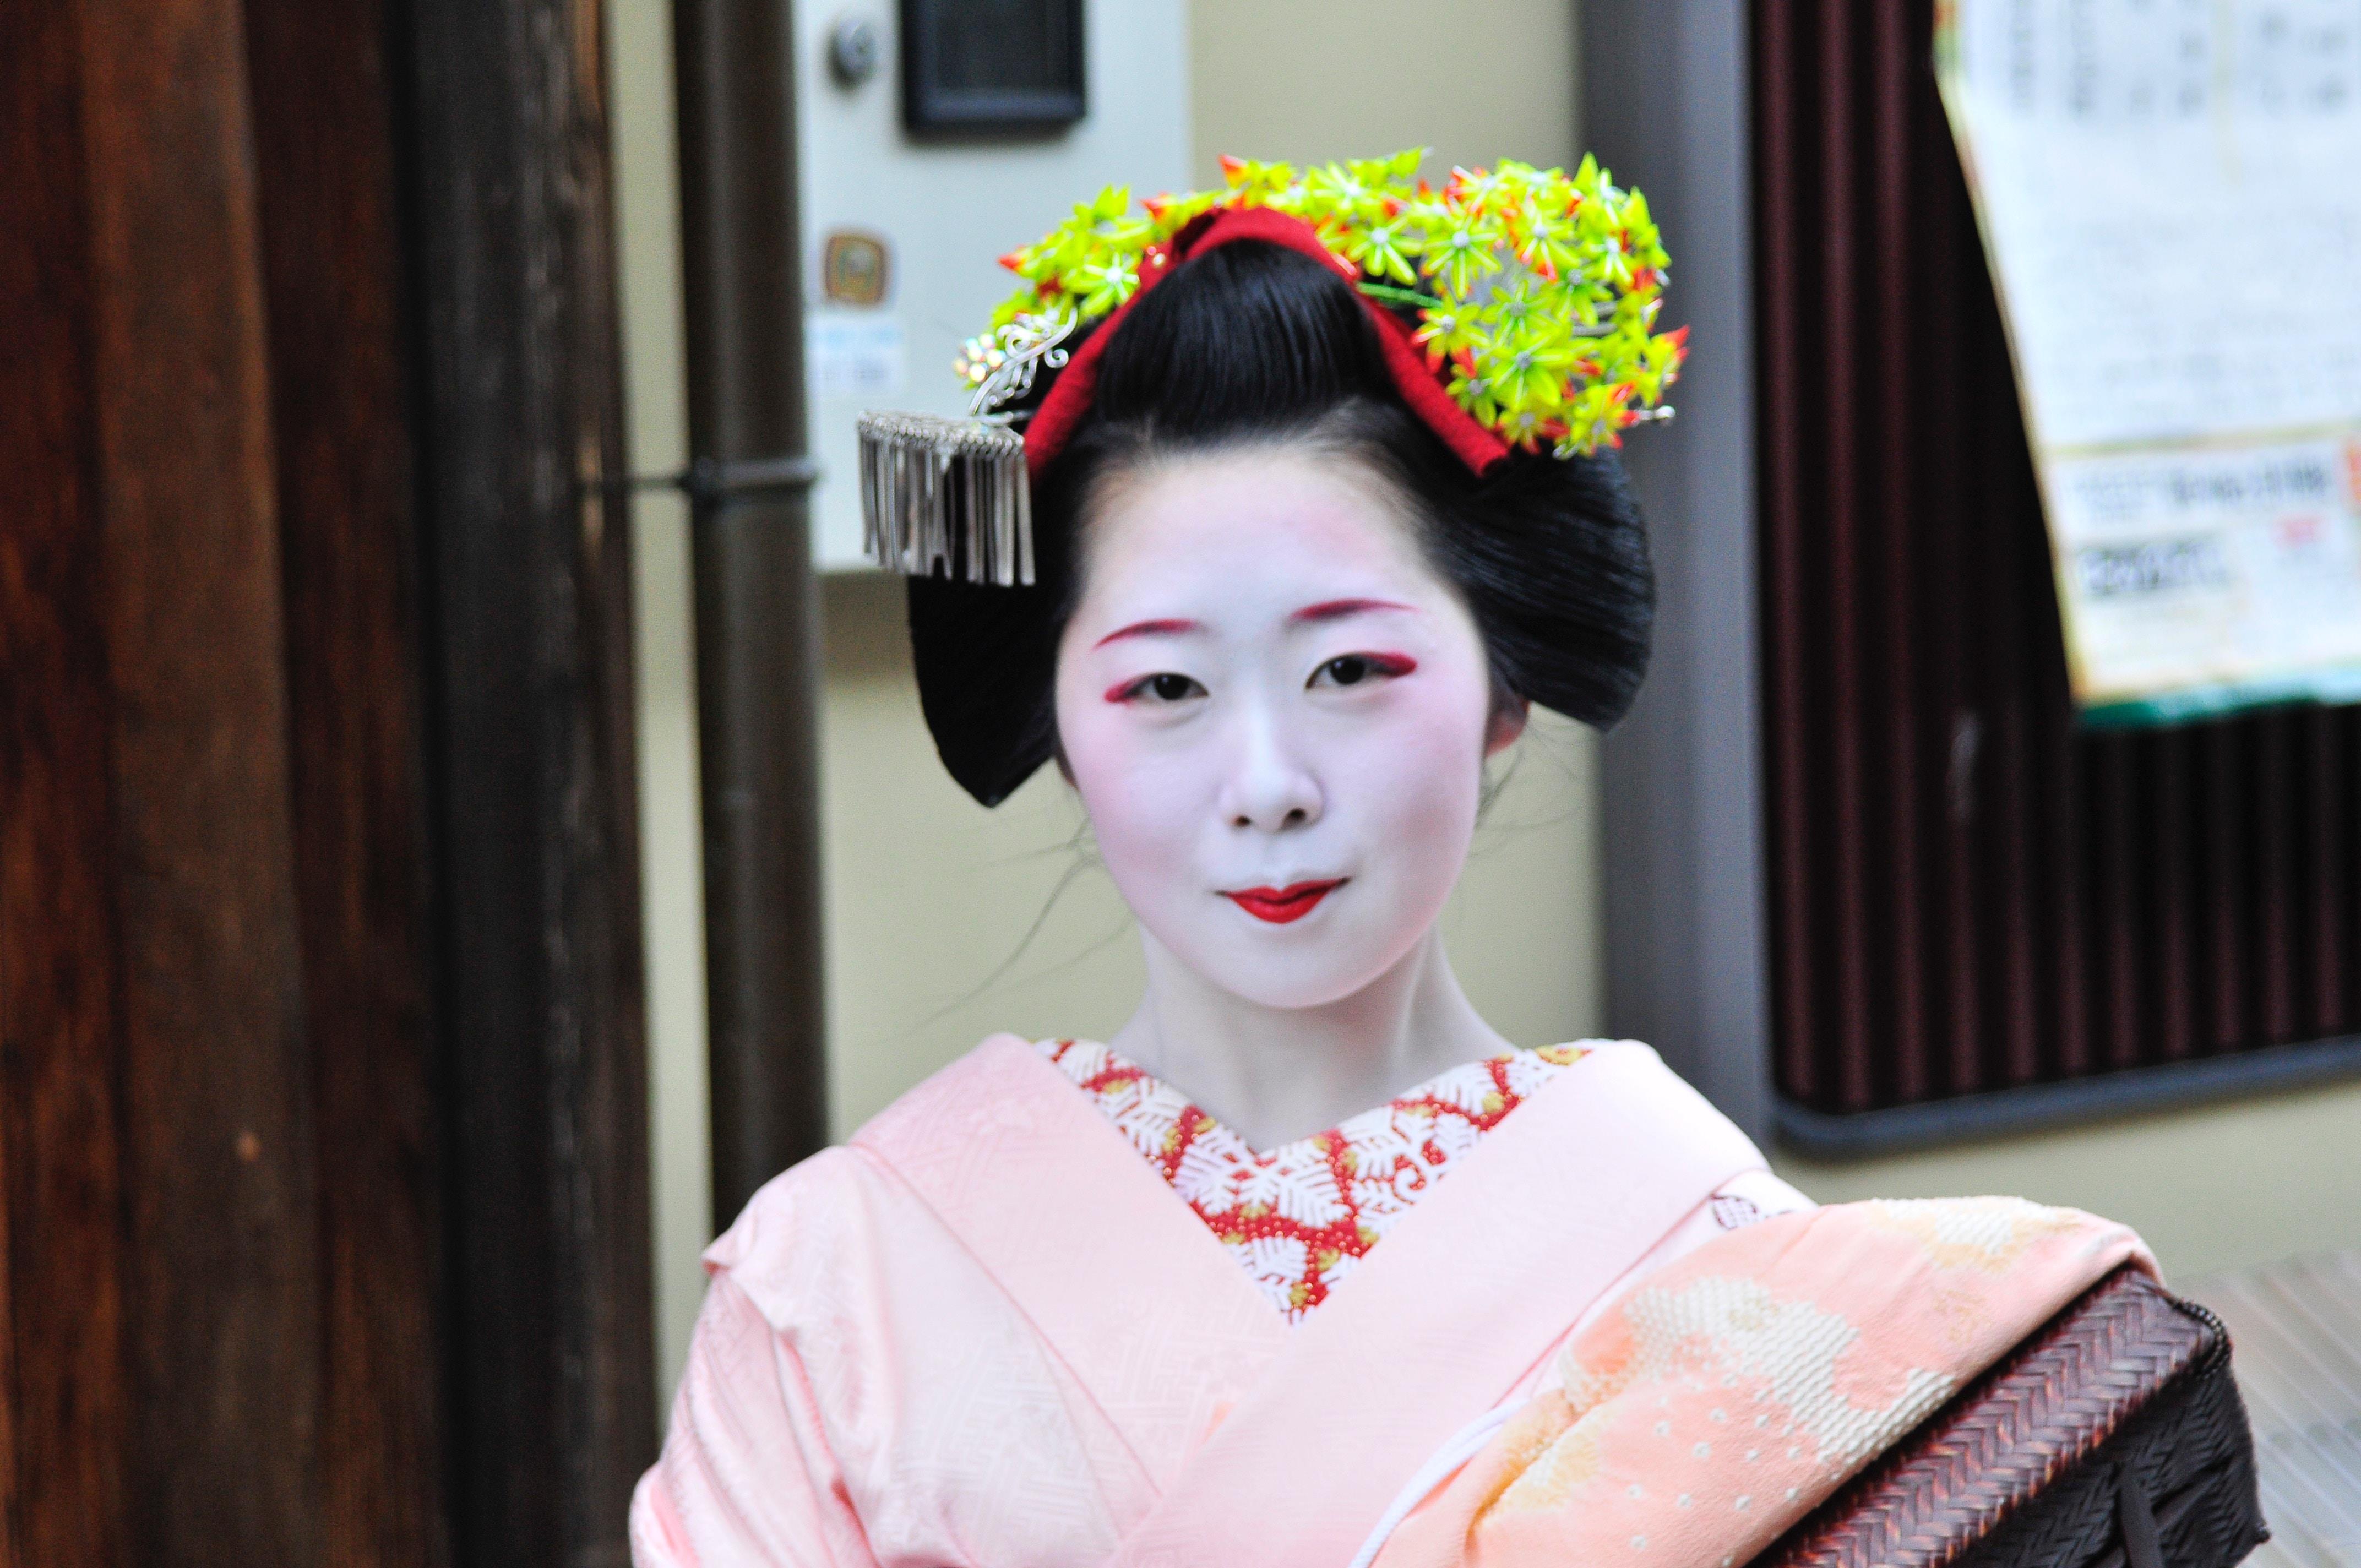 Maikos are Geishas in training. Captured in this image is a young Maiko. Fully devoted to the art of Geishas. These individuals are representative of Kodawari.